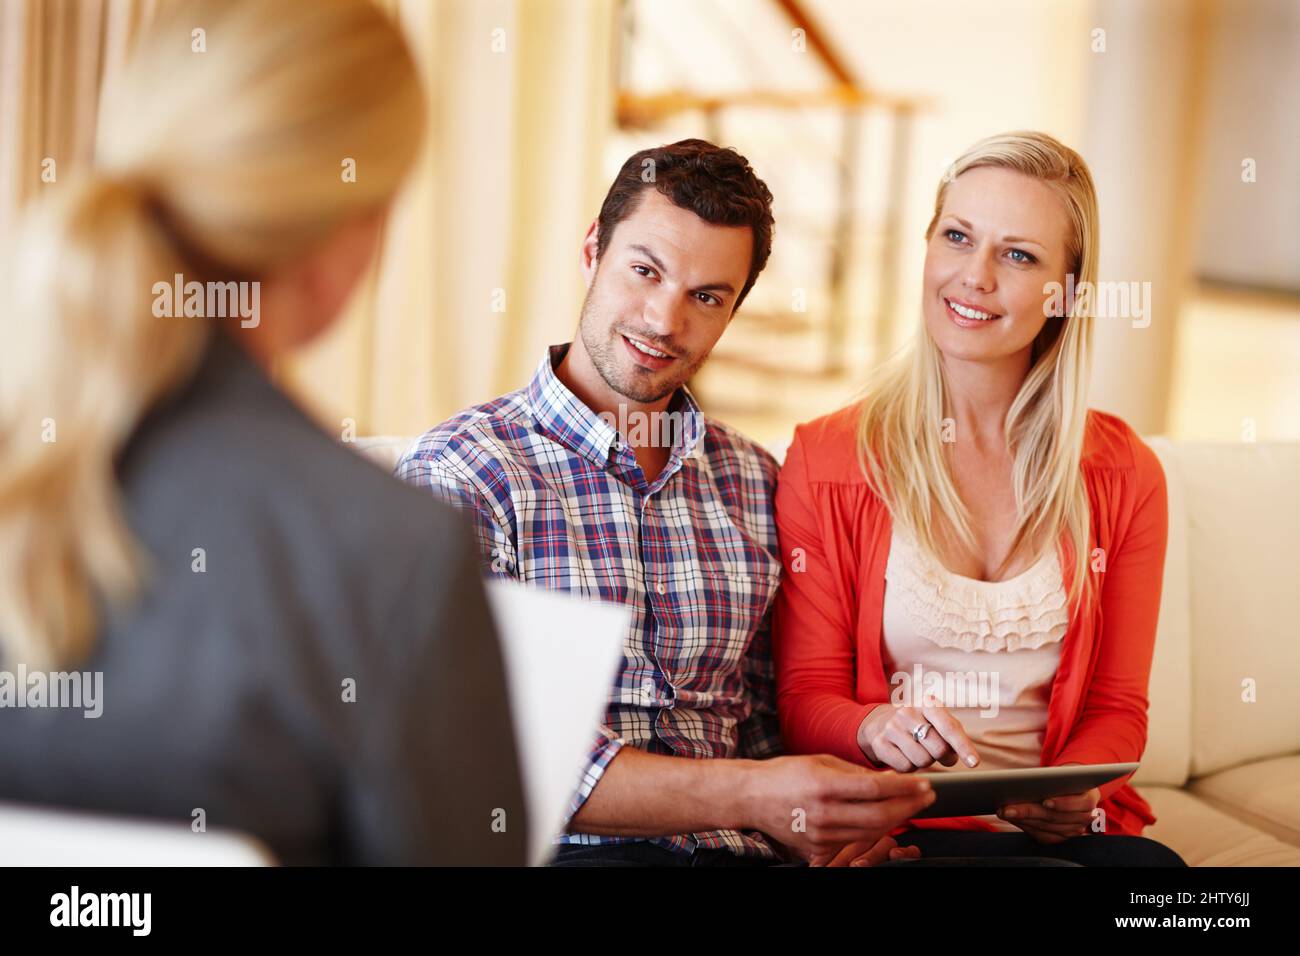 Financial planning today means great rewards tomorrow. A happy couple getting advice from a financial consultant in their home. Stock Photo